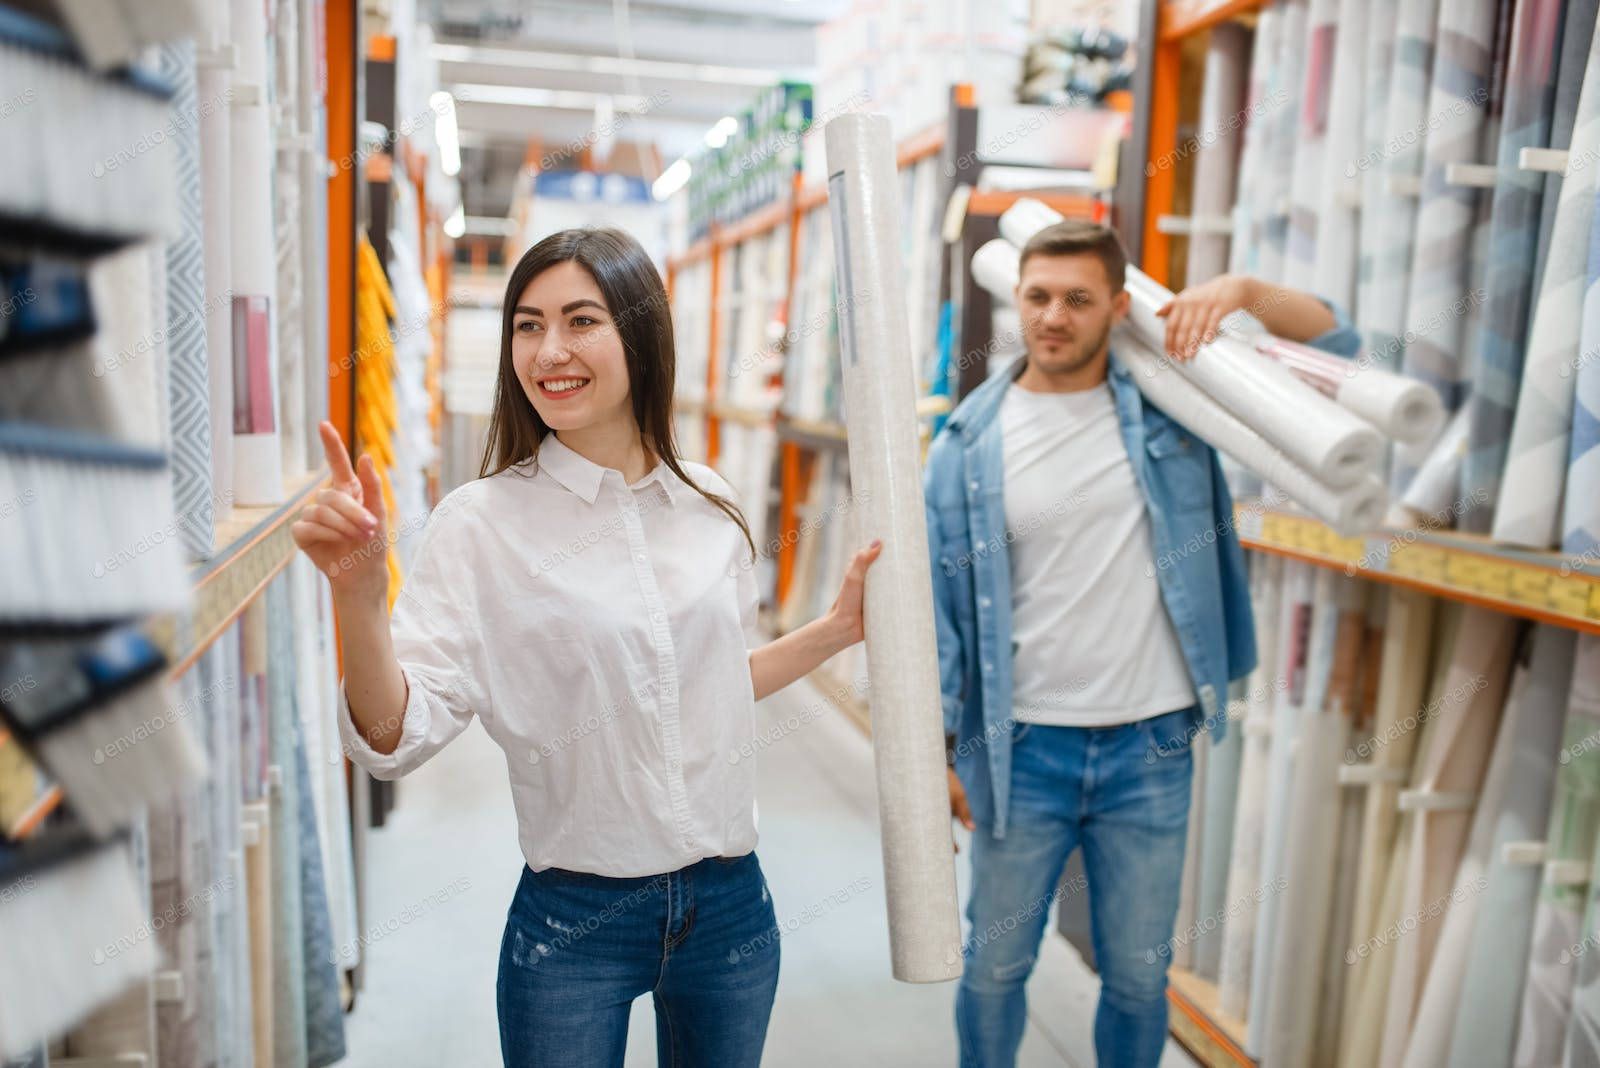 Couple Buying Materials In Store Wallpaper